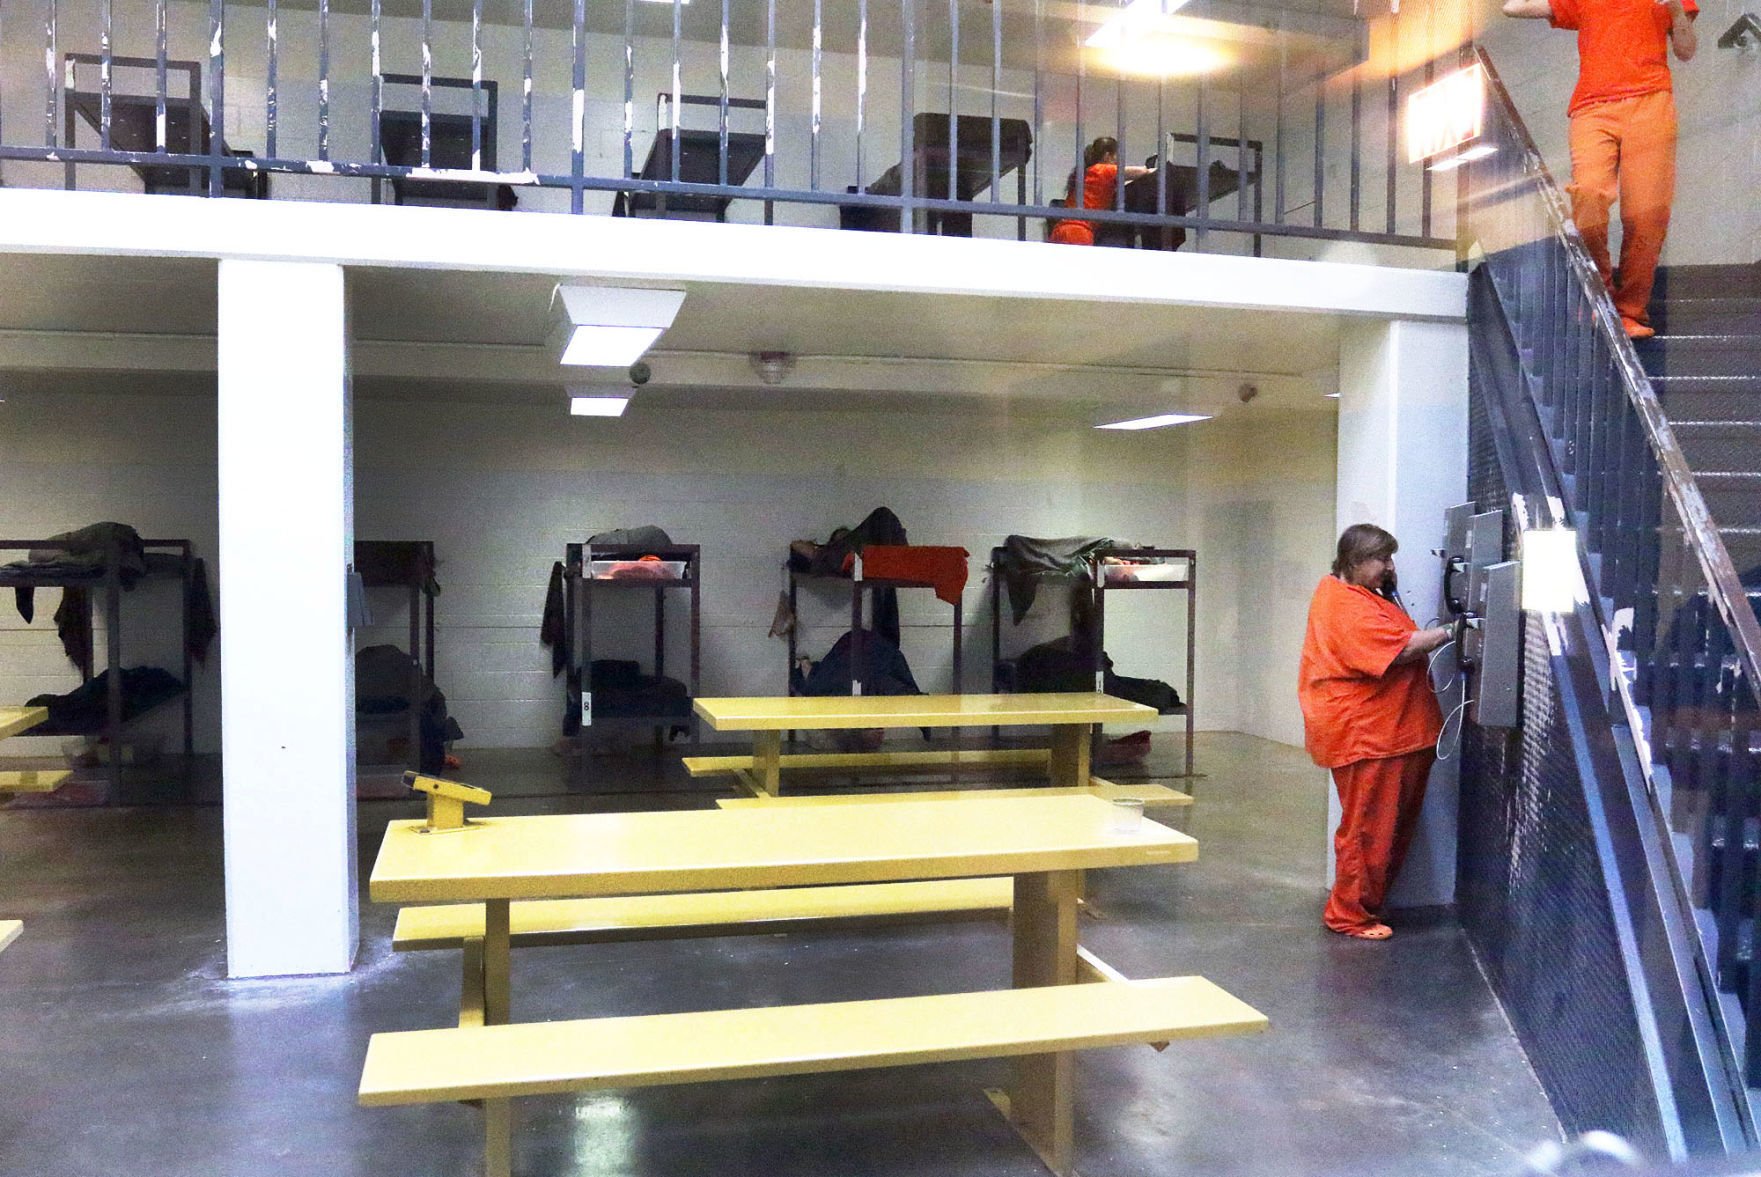 icare packages for jail inmates idaho